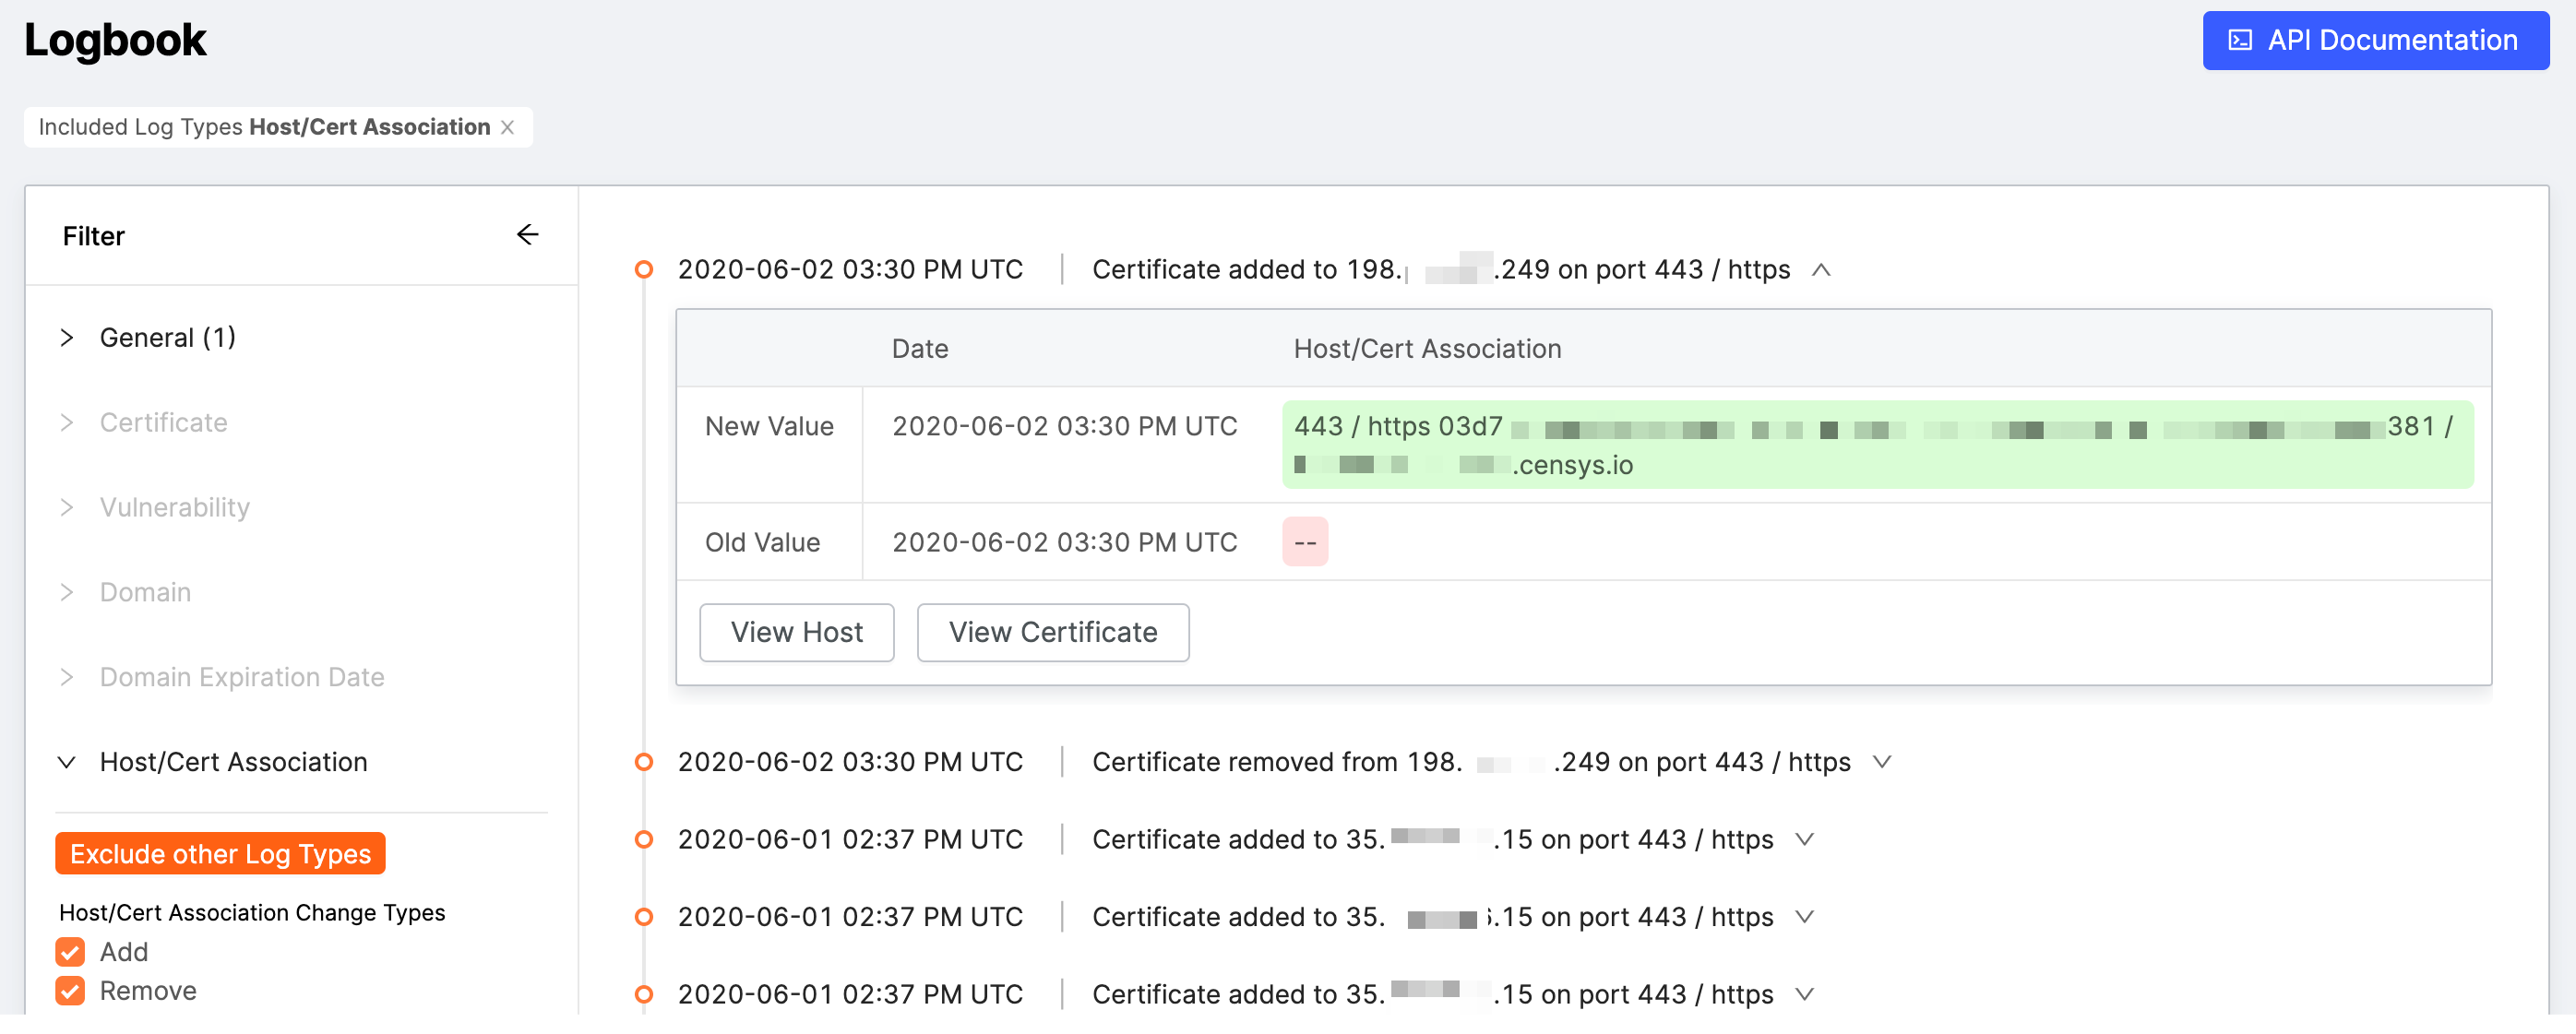 Logbook showing certificate and host association filters